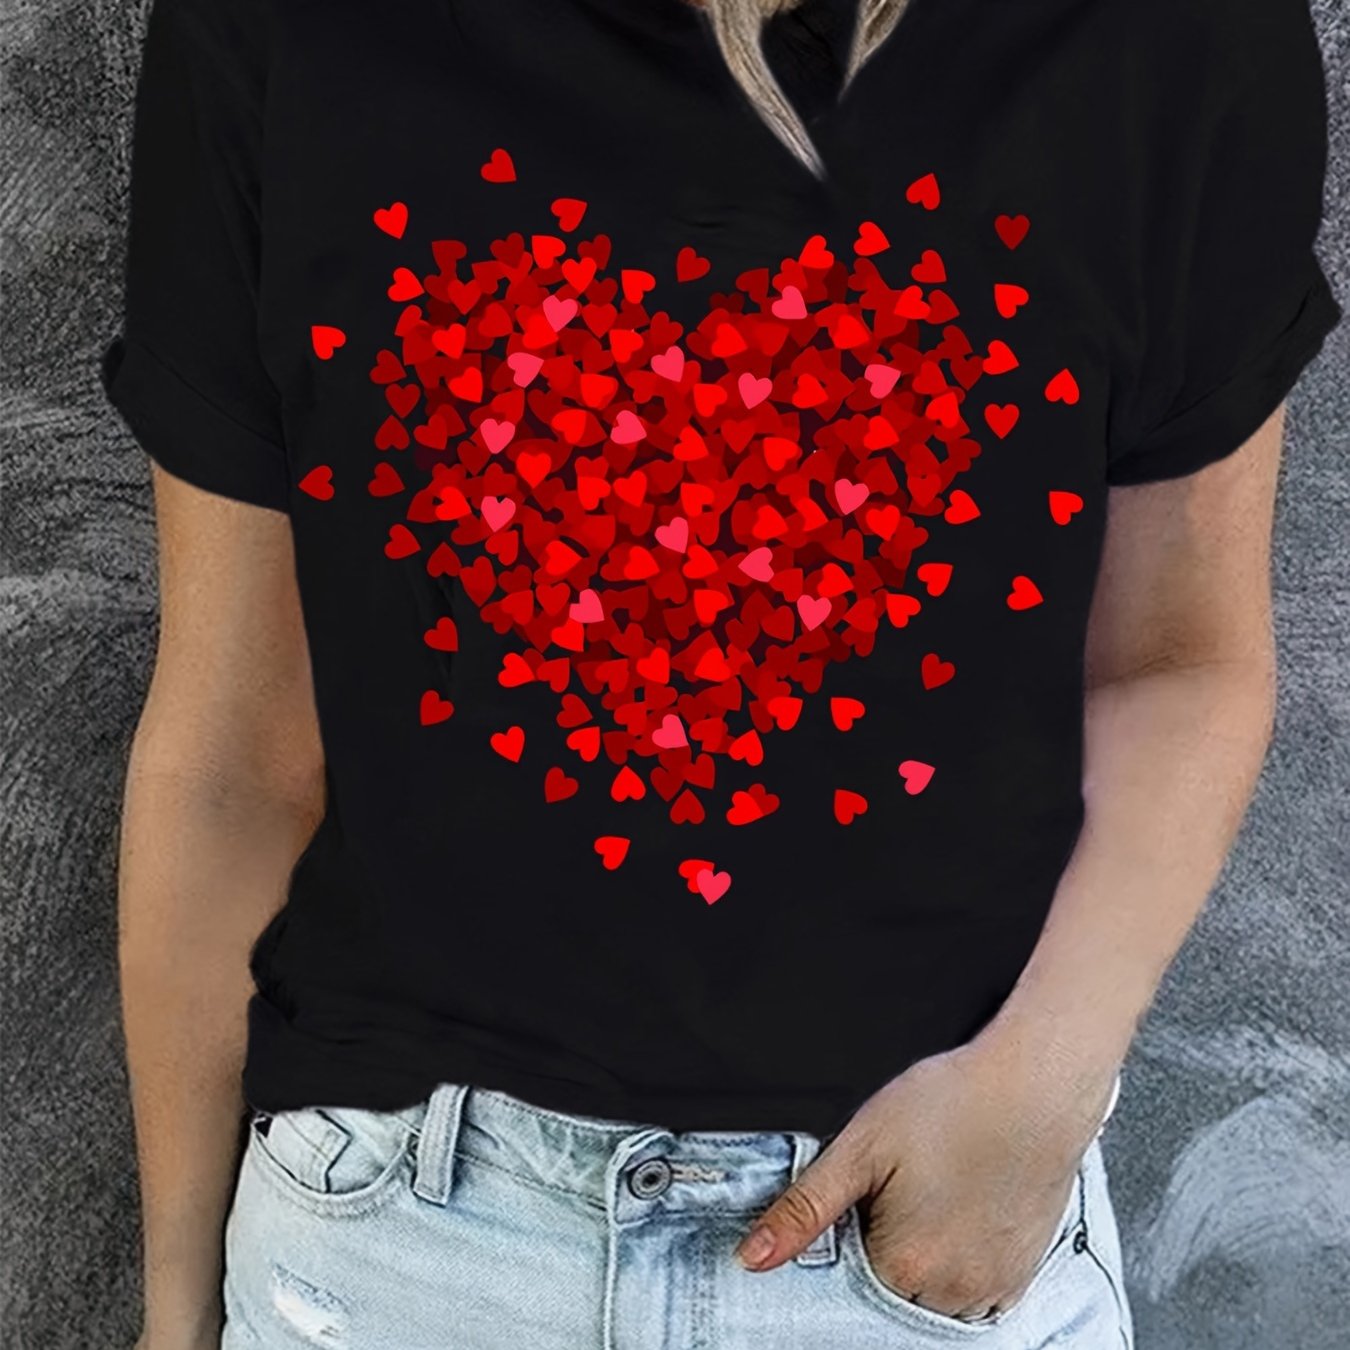 Heart Print T-Shirt For Valentine's Day Gifts, Crew Neck Short Sleeve T-Shirt, Casual Every Day Tops, Women's Clothing